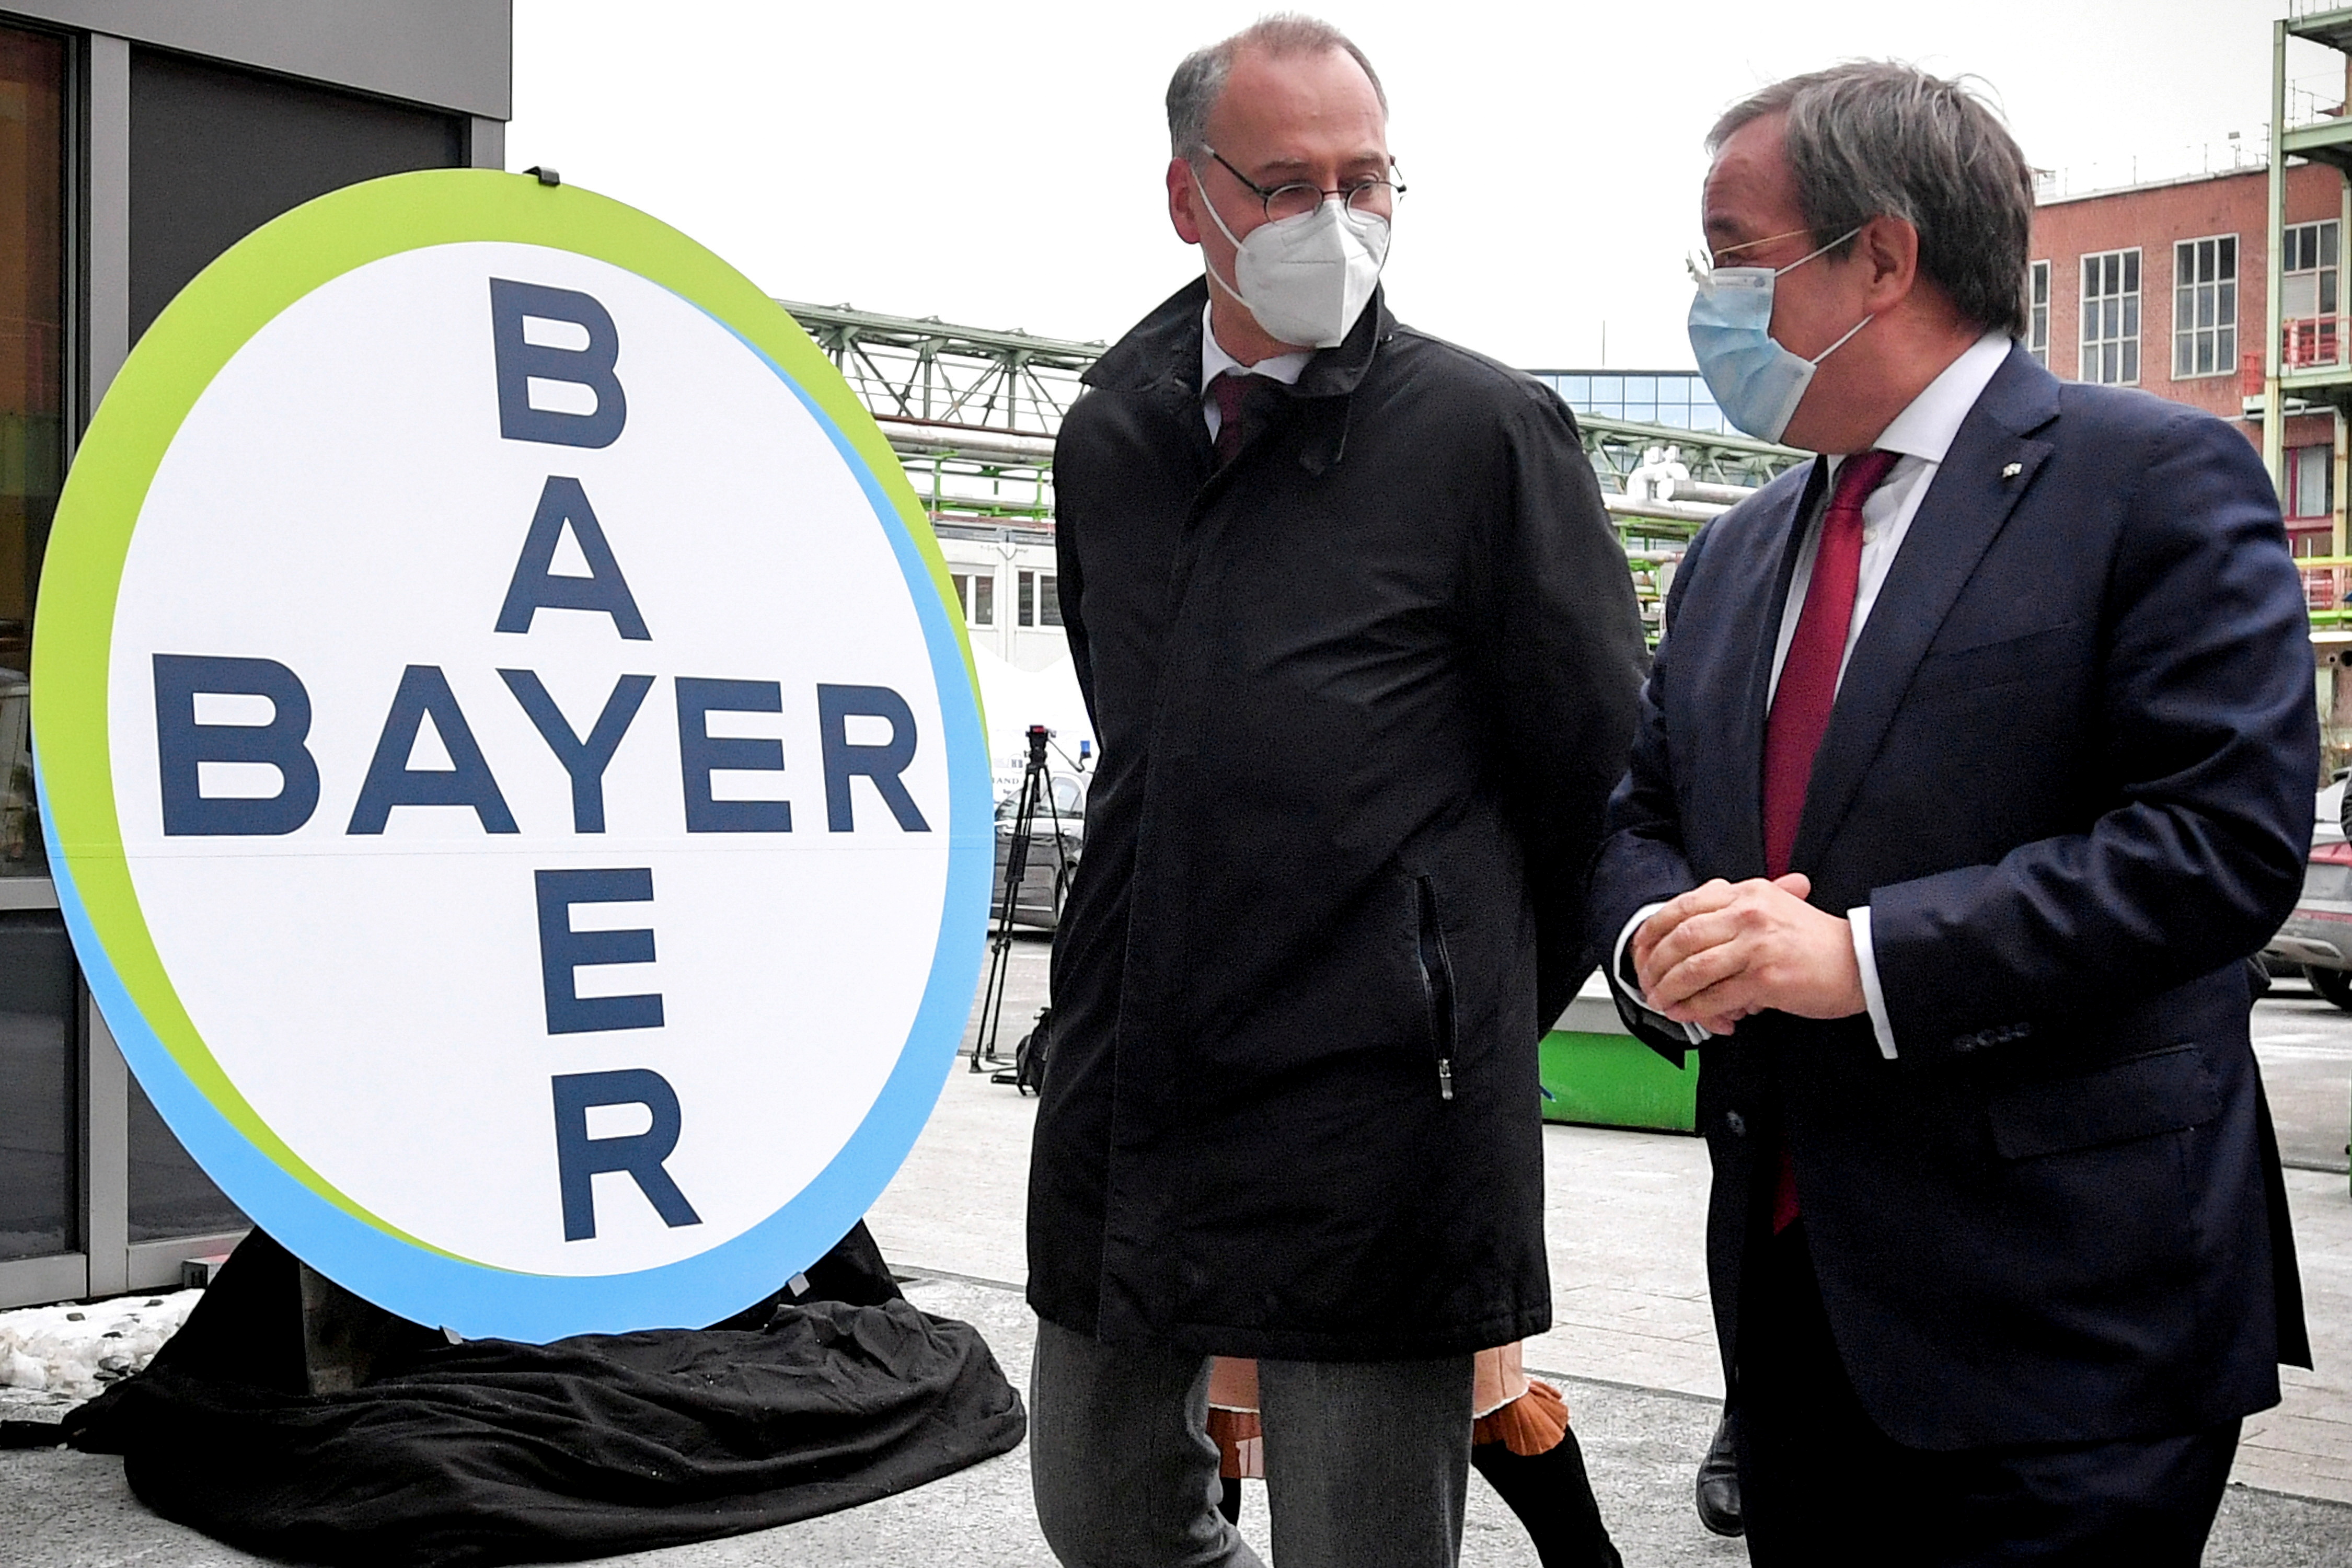 Prime Minister of North Rhine-Westphalia Armin Laschet and Werner Baumann, CEO of German pharmaceutical company Bayer AG, speak to the media following their visit to the future production site of CureVac's COVID-19 vaccine (CVnCoV) at the Bayer AG plant in Wuppertal, Germany February 15, 2021. Sascha Steinbach/Pool via REUTERS/File Photo